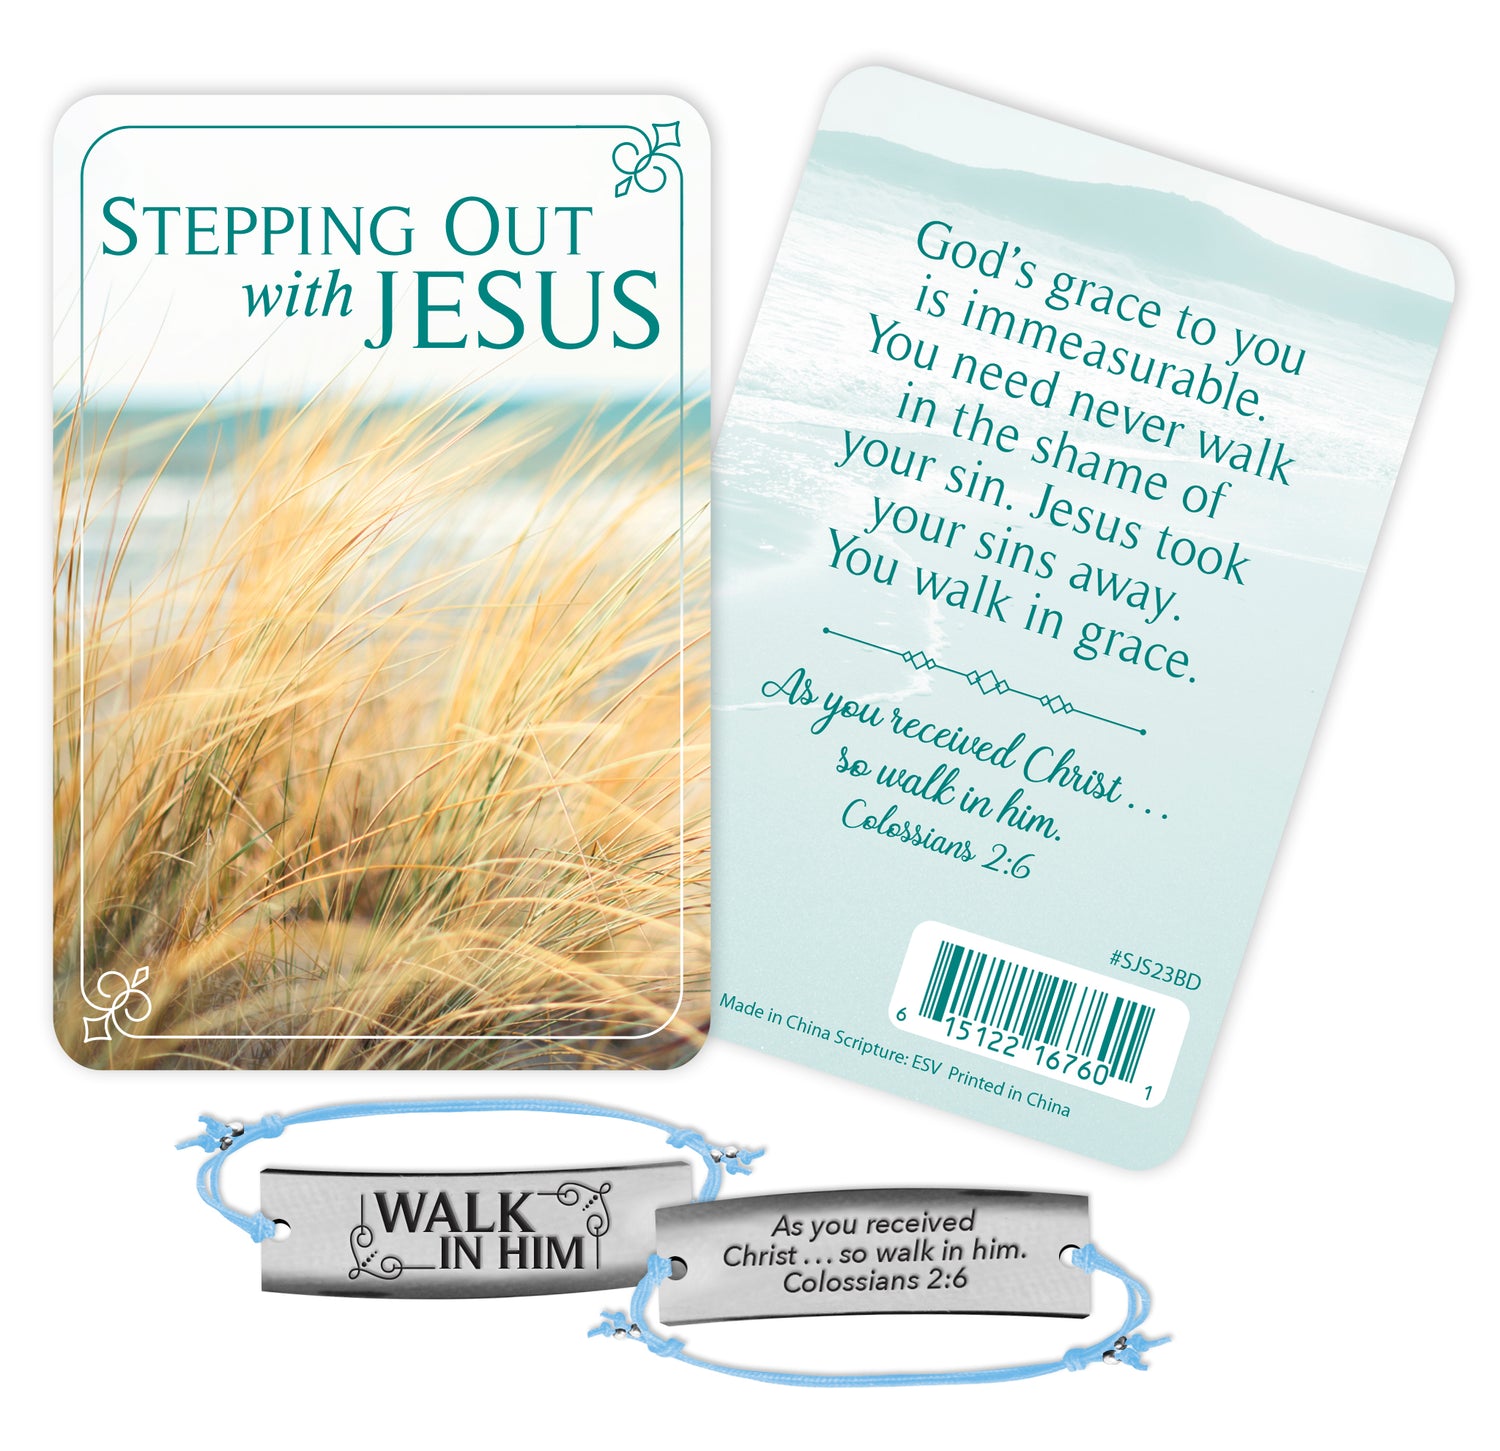 Stepping Out with Jesus adjustable bar bracelet and pocket card for Christian women's ministry